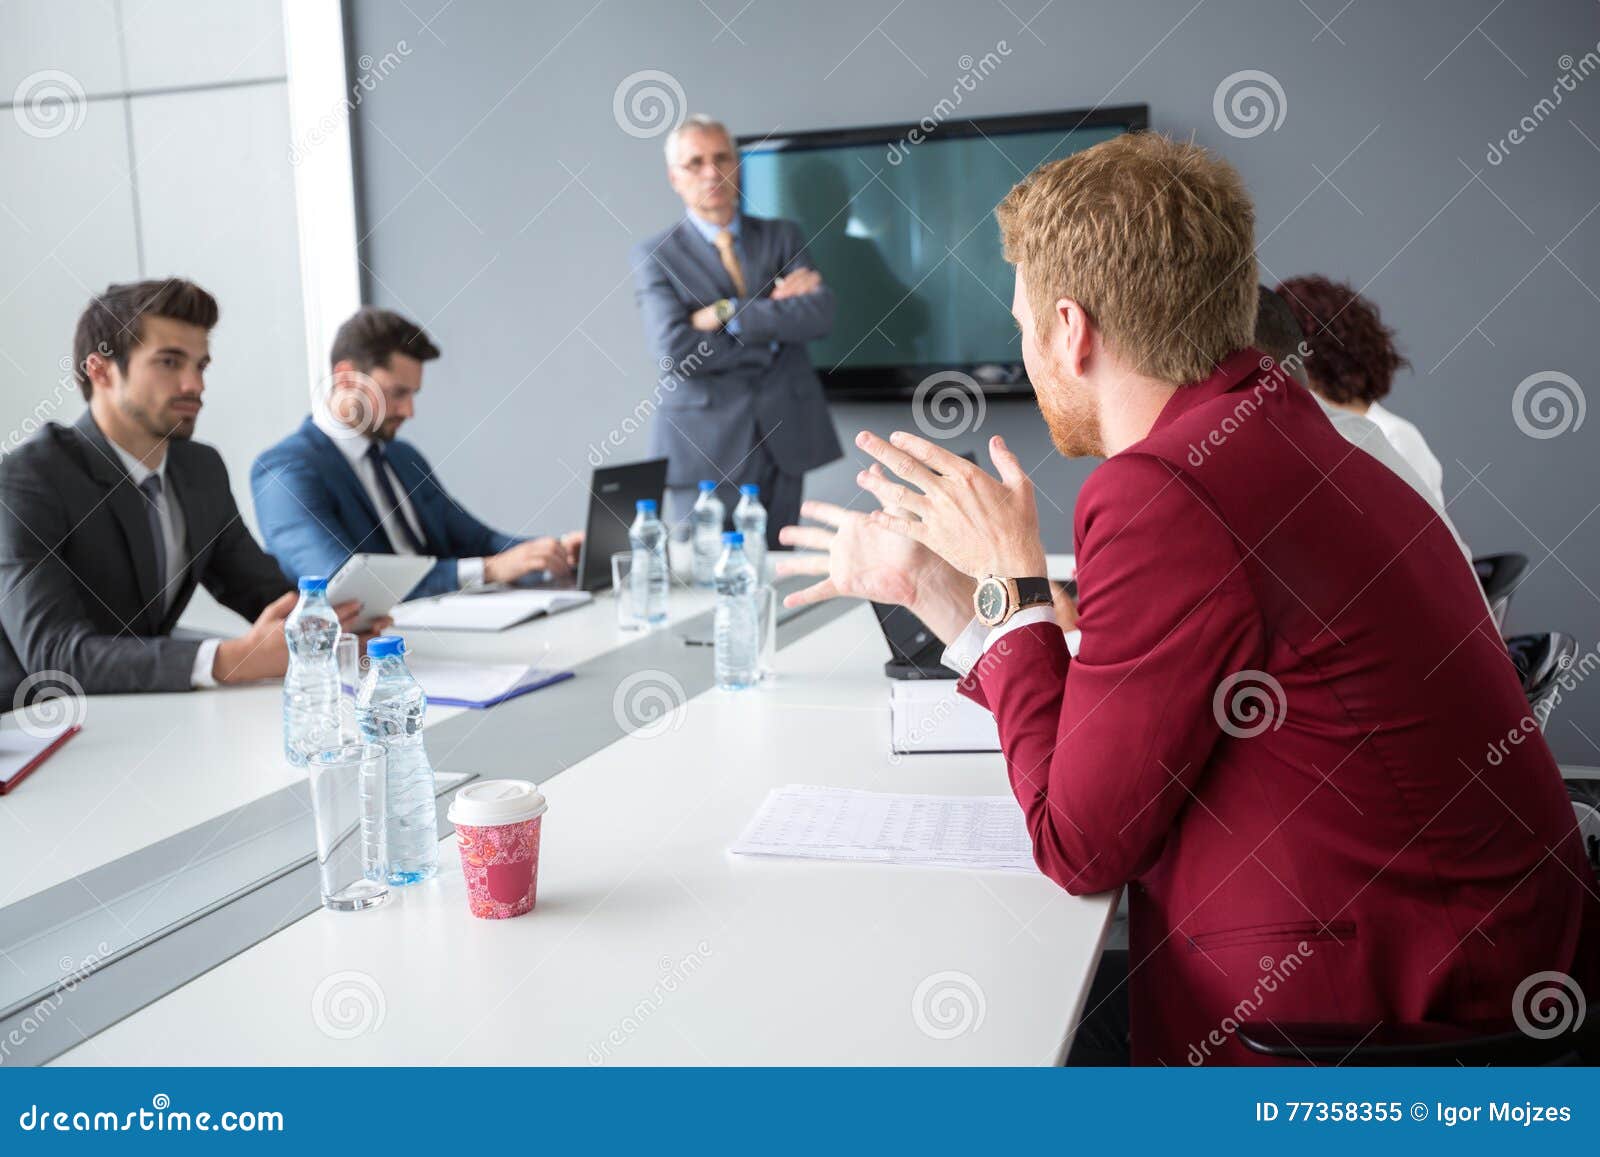 employ present his opinions to director and collogues